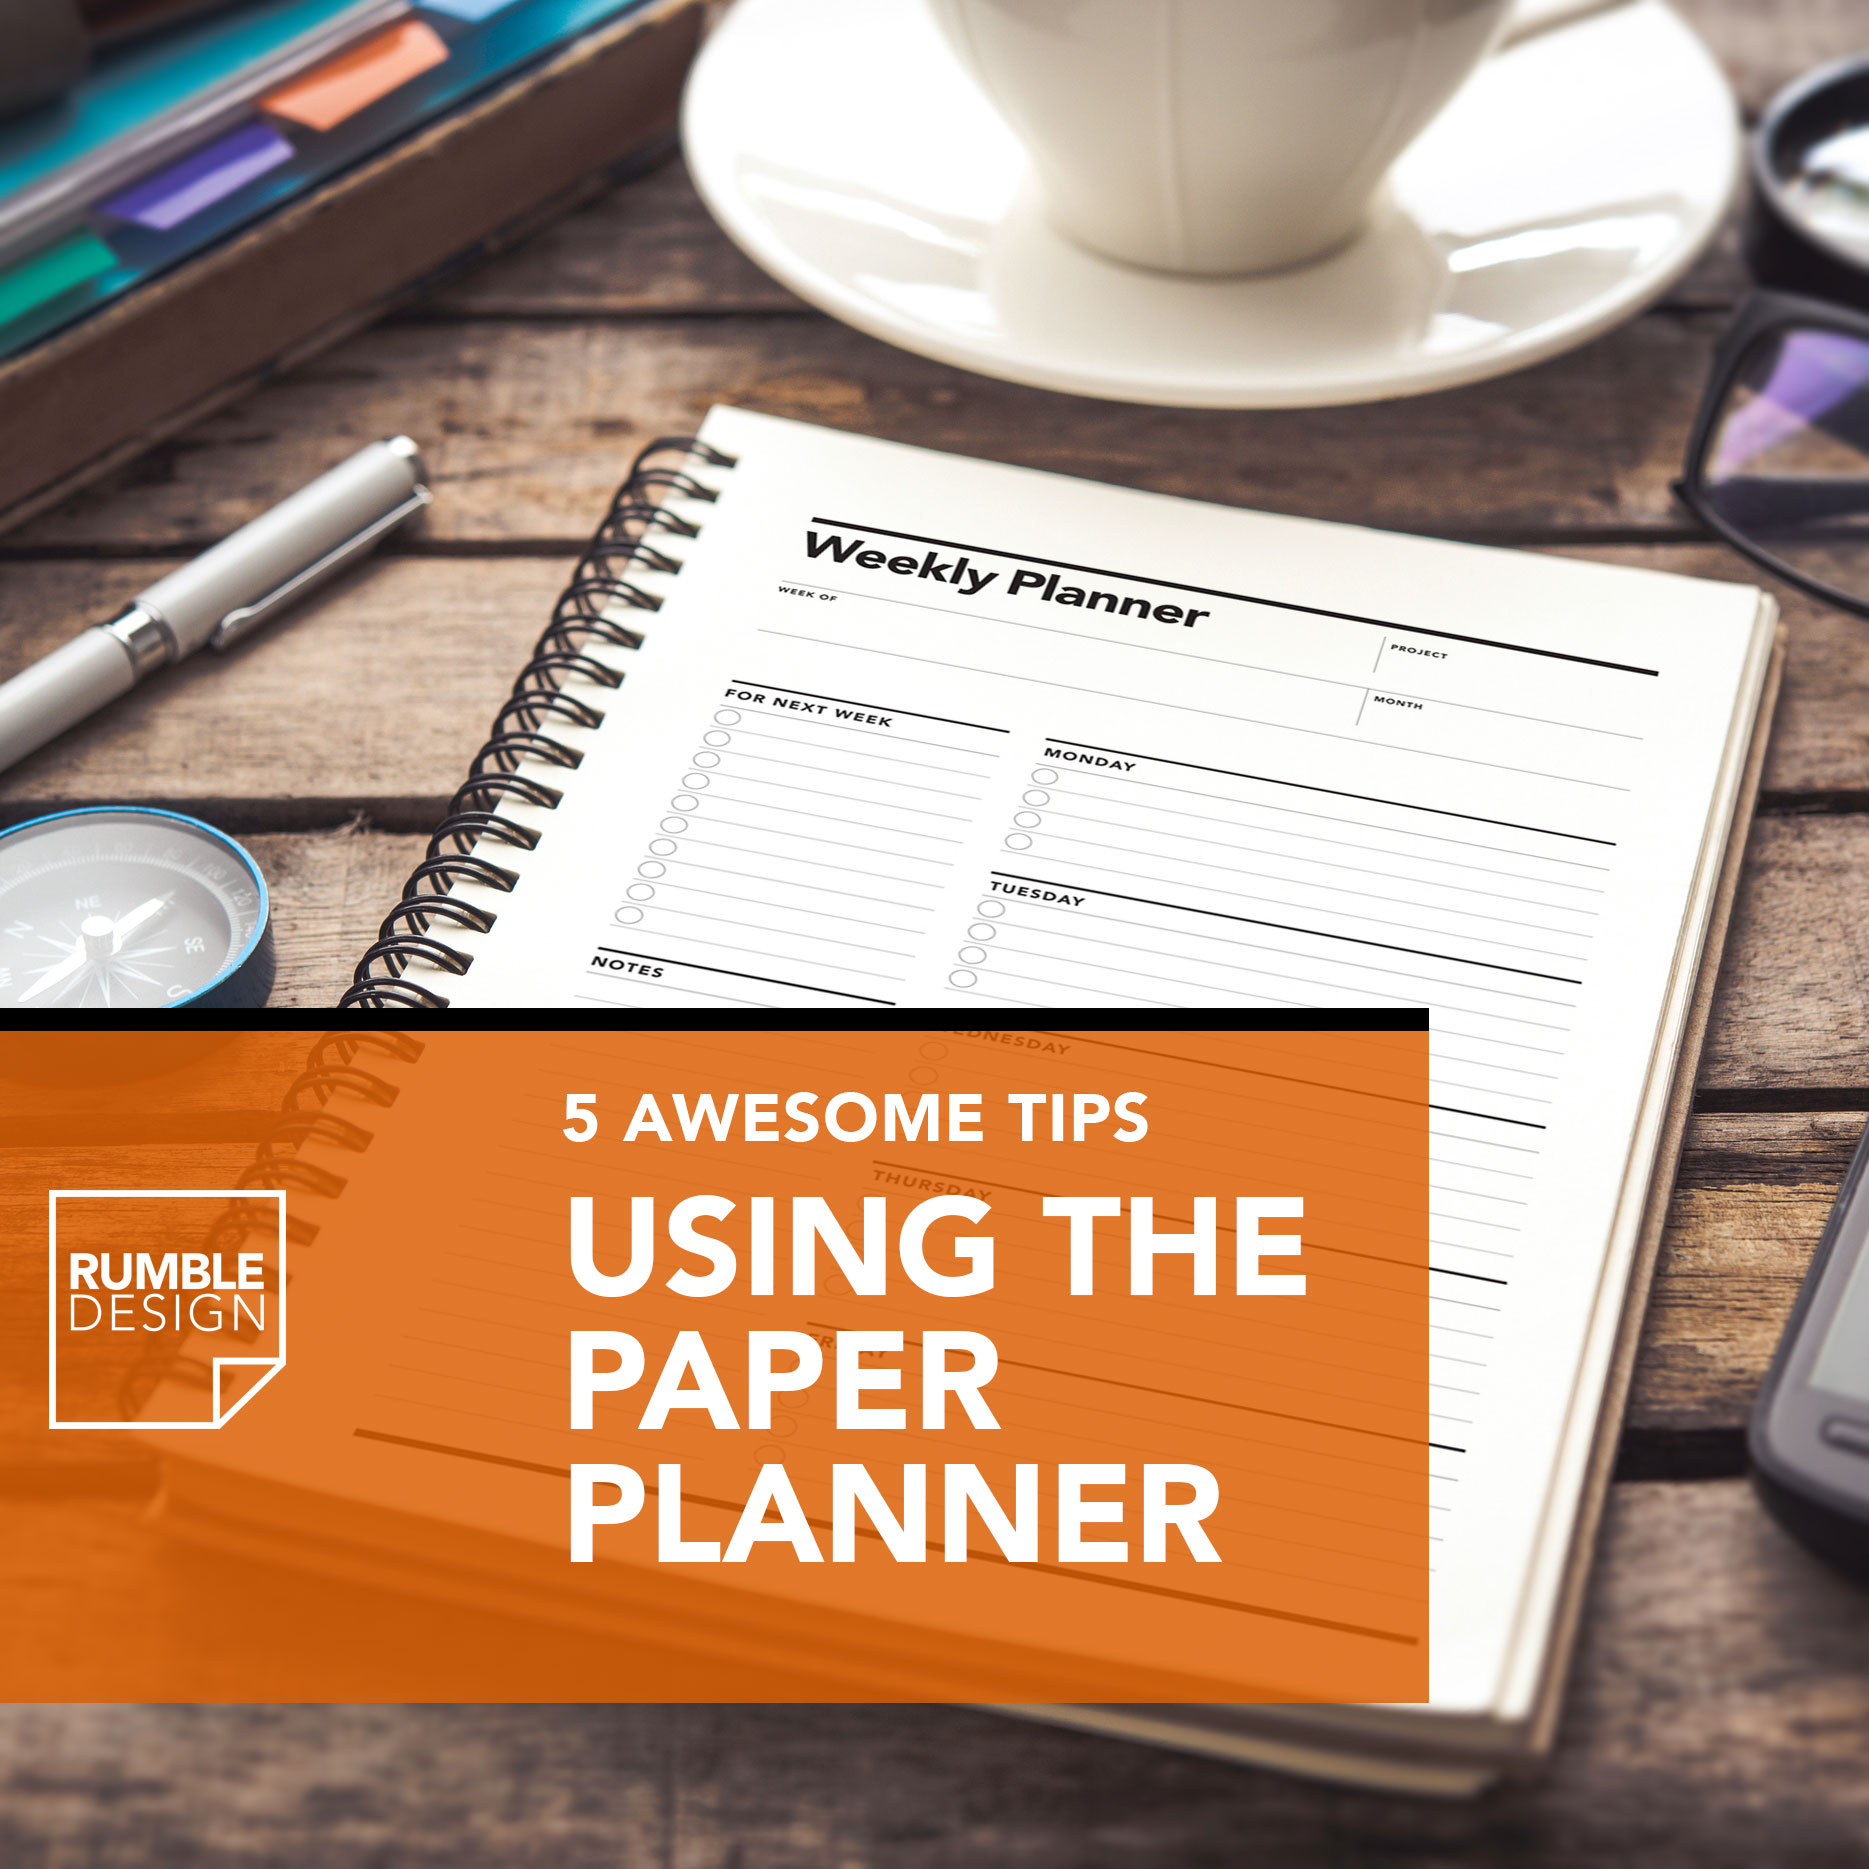 5 Tips to Using a Paper Planner Rumble Design Store